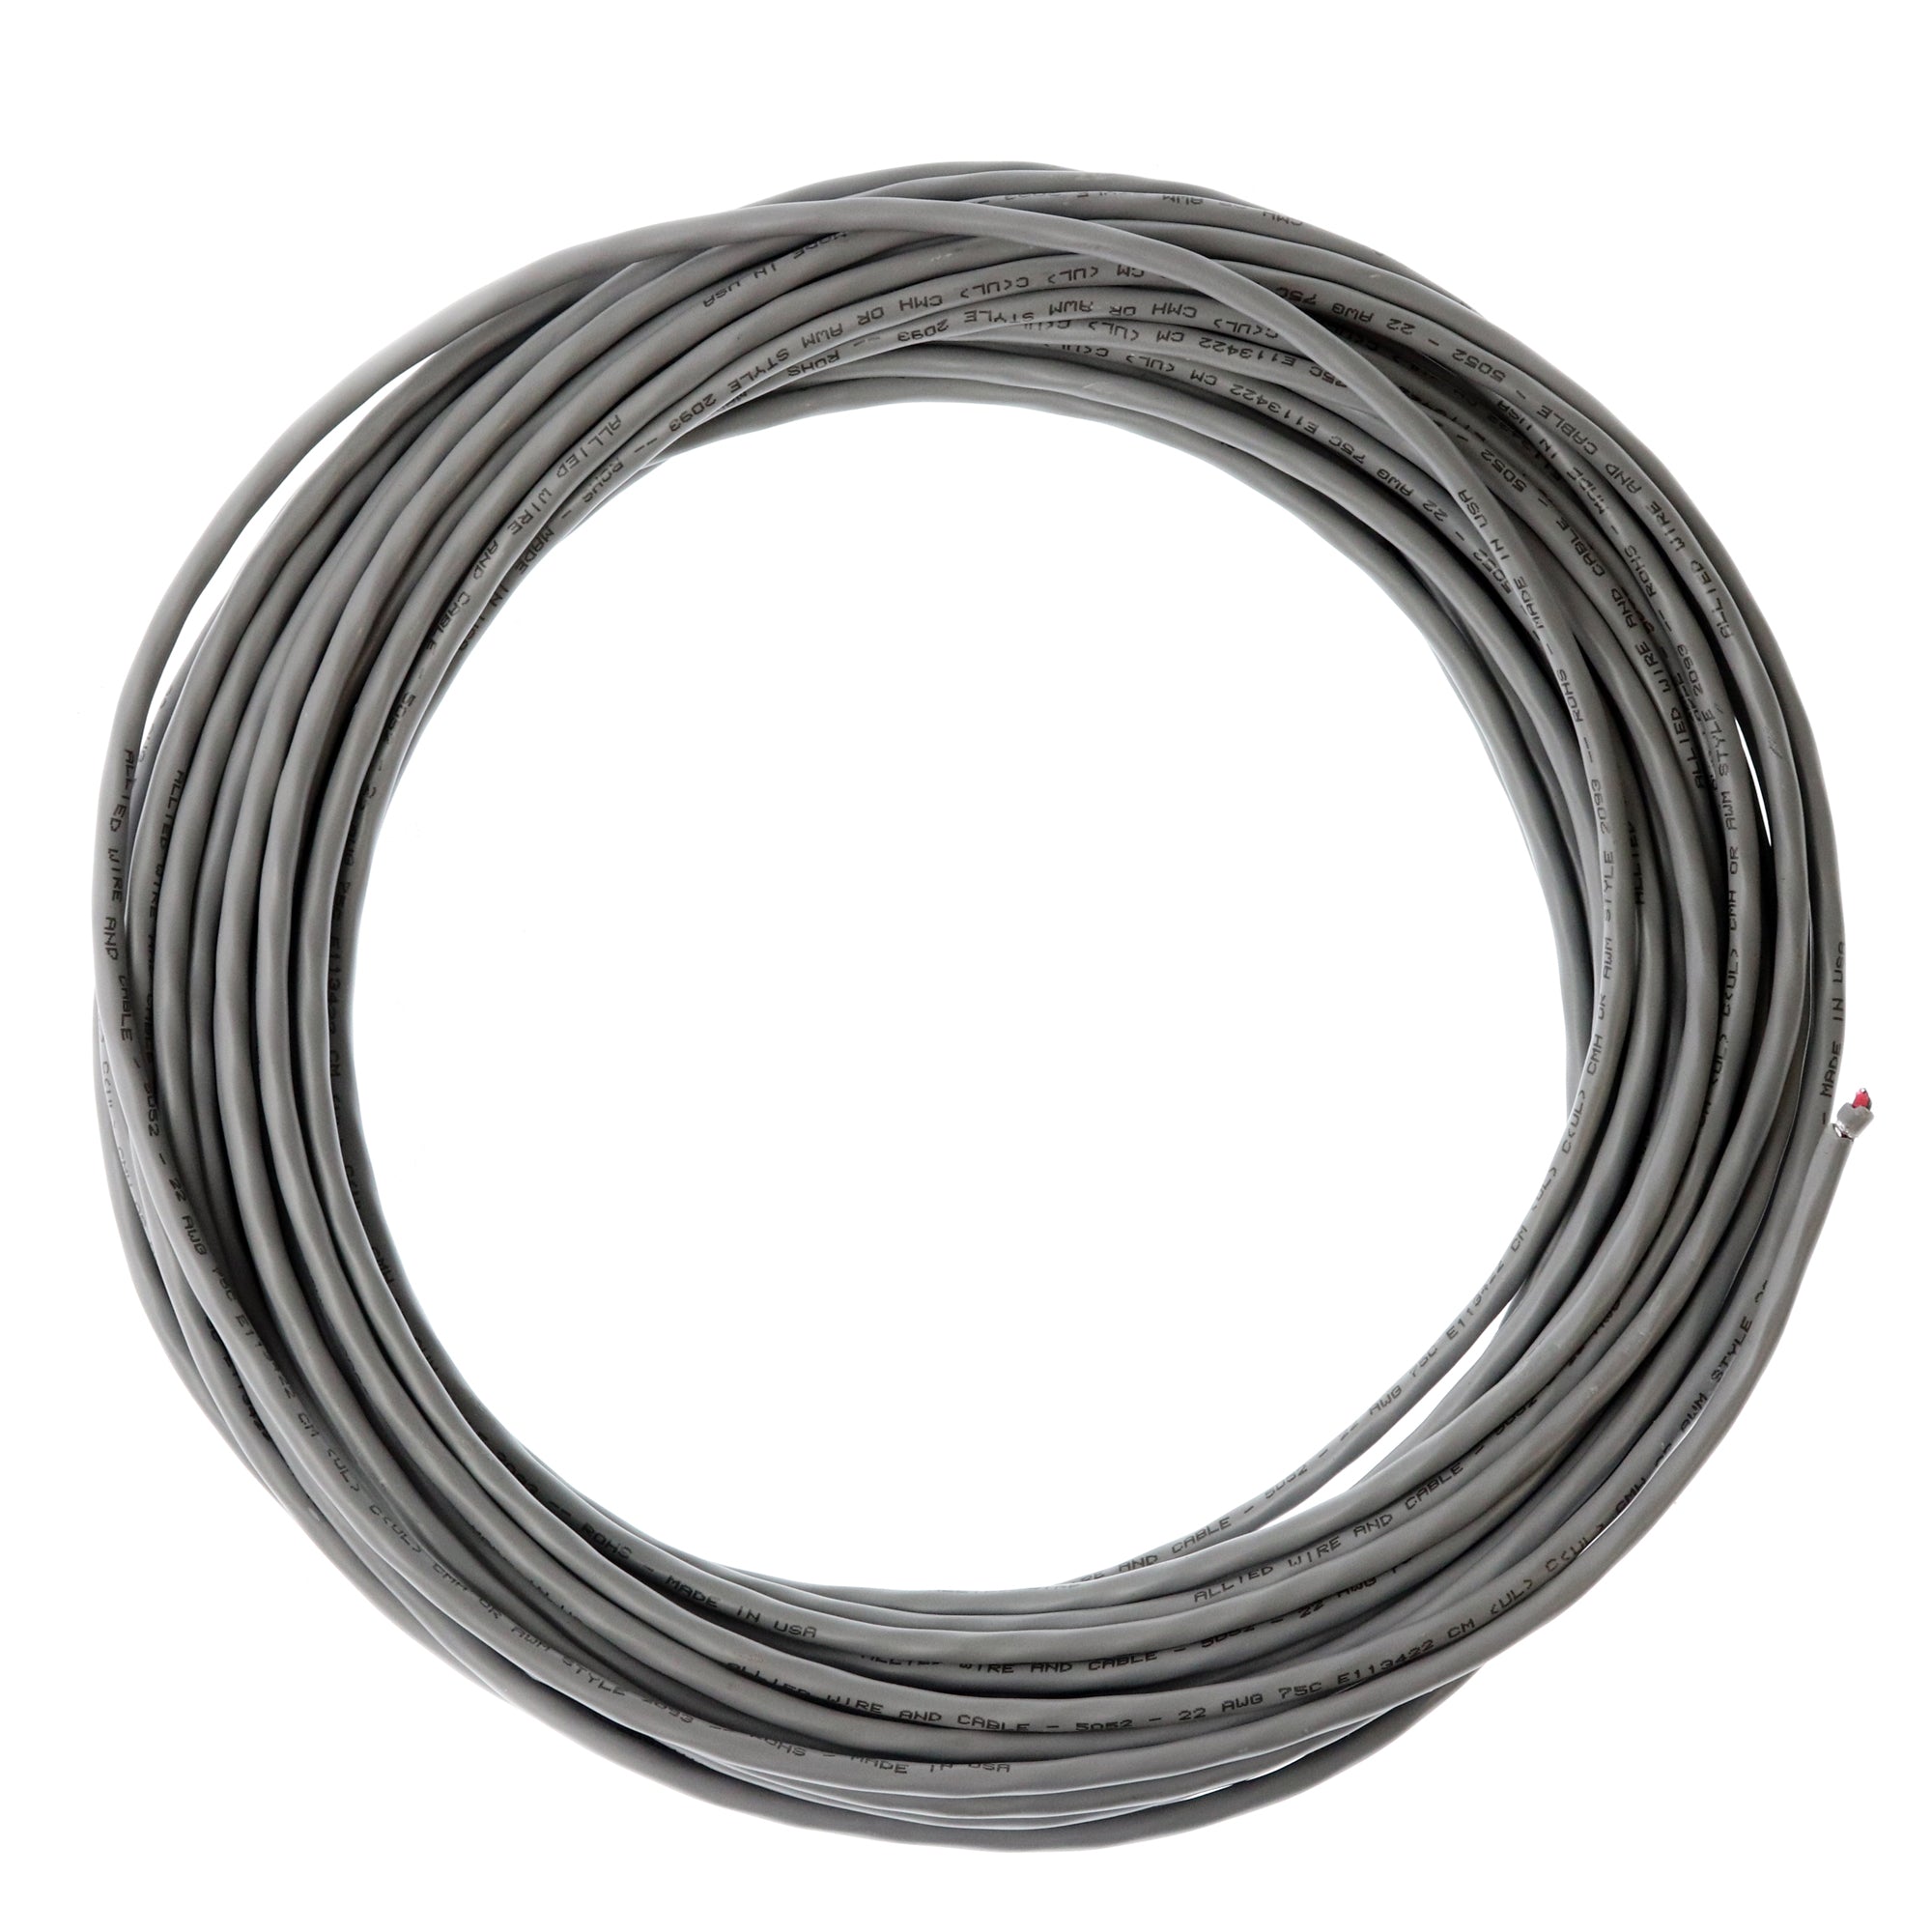 Allied Wire & Cable, ALLIED 5052 SHIELDED MULTI-CONDUCTOR CABLE, 22/4C, GRAY PVC JACKET, 50-FEET